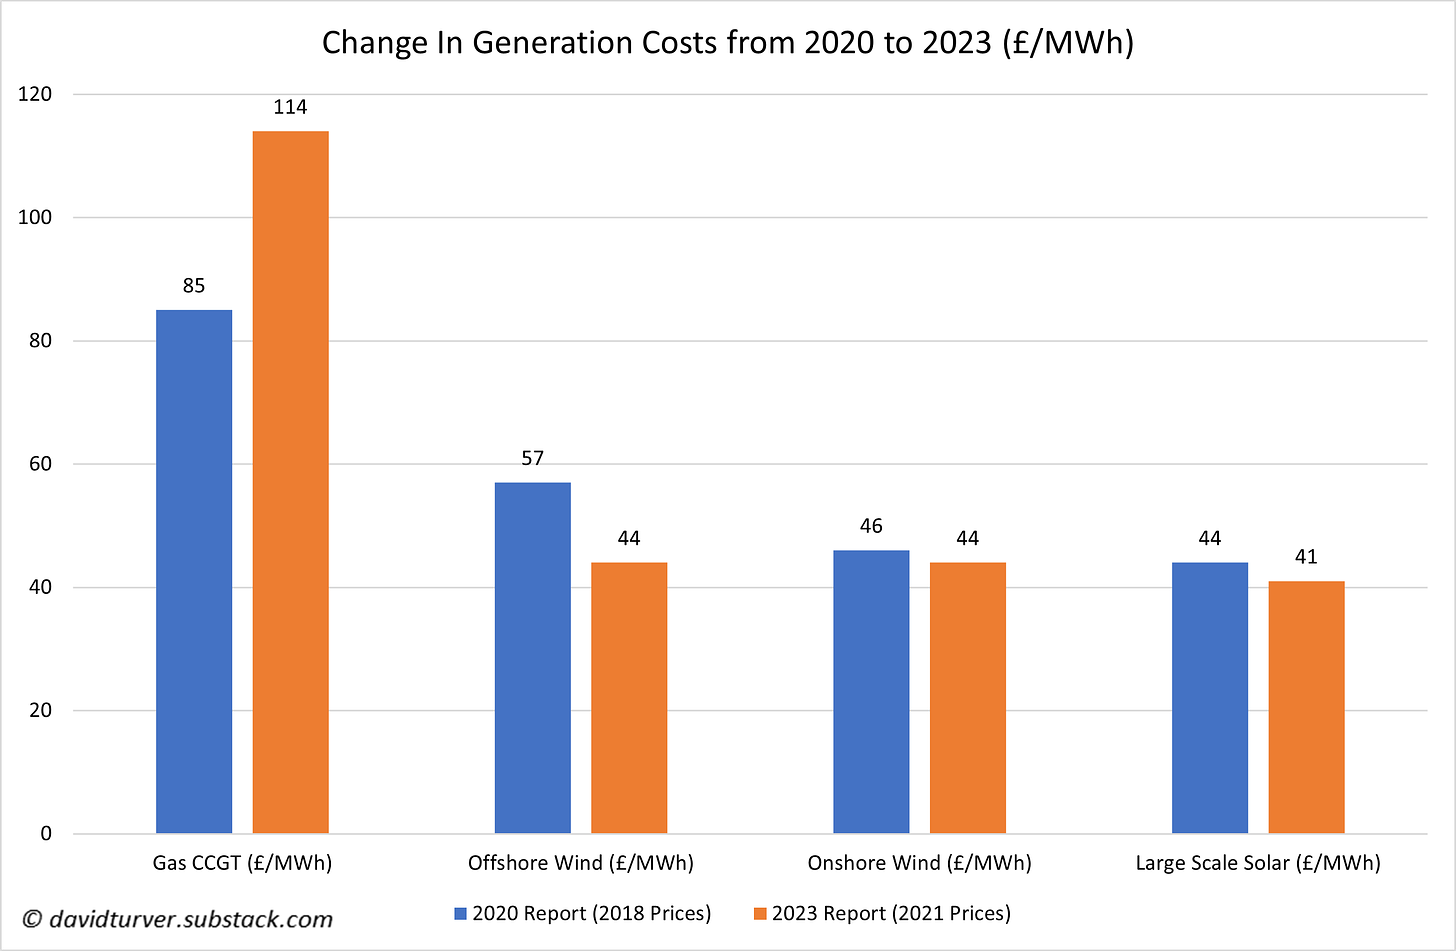 Change in LCOE for gas and offshore wind 2020 to 2023